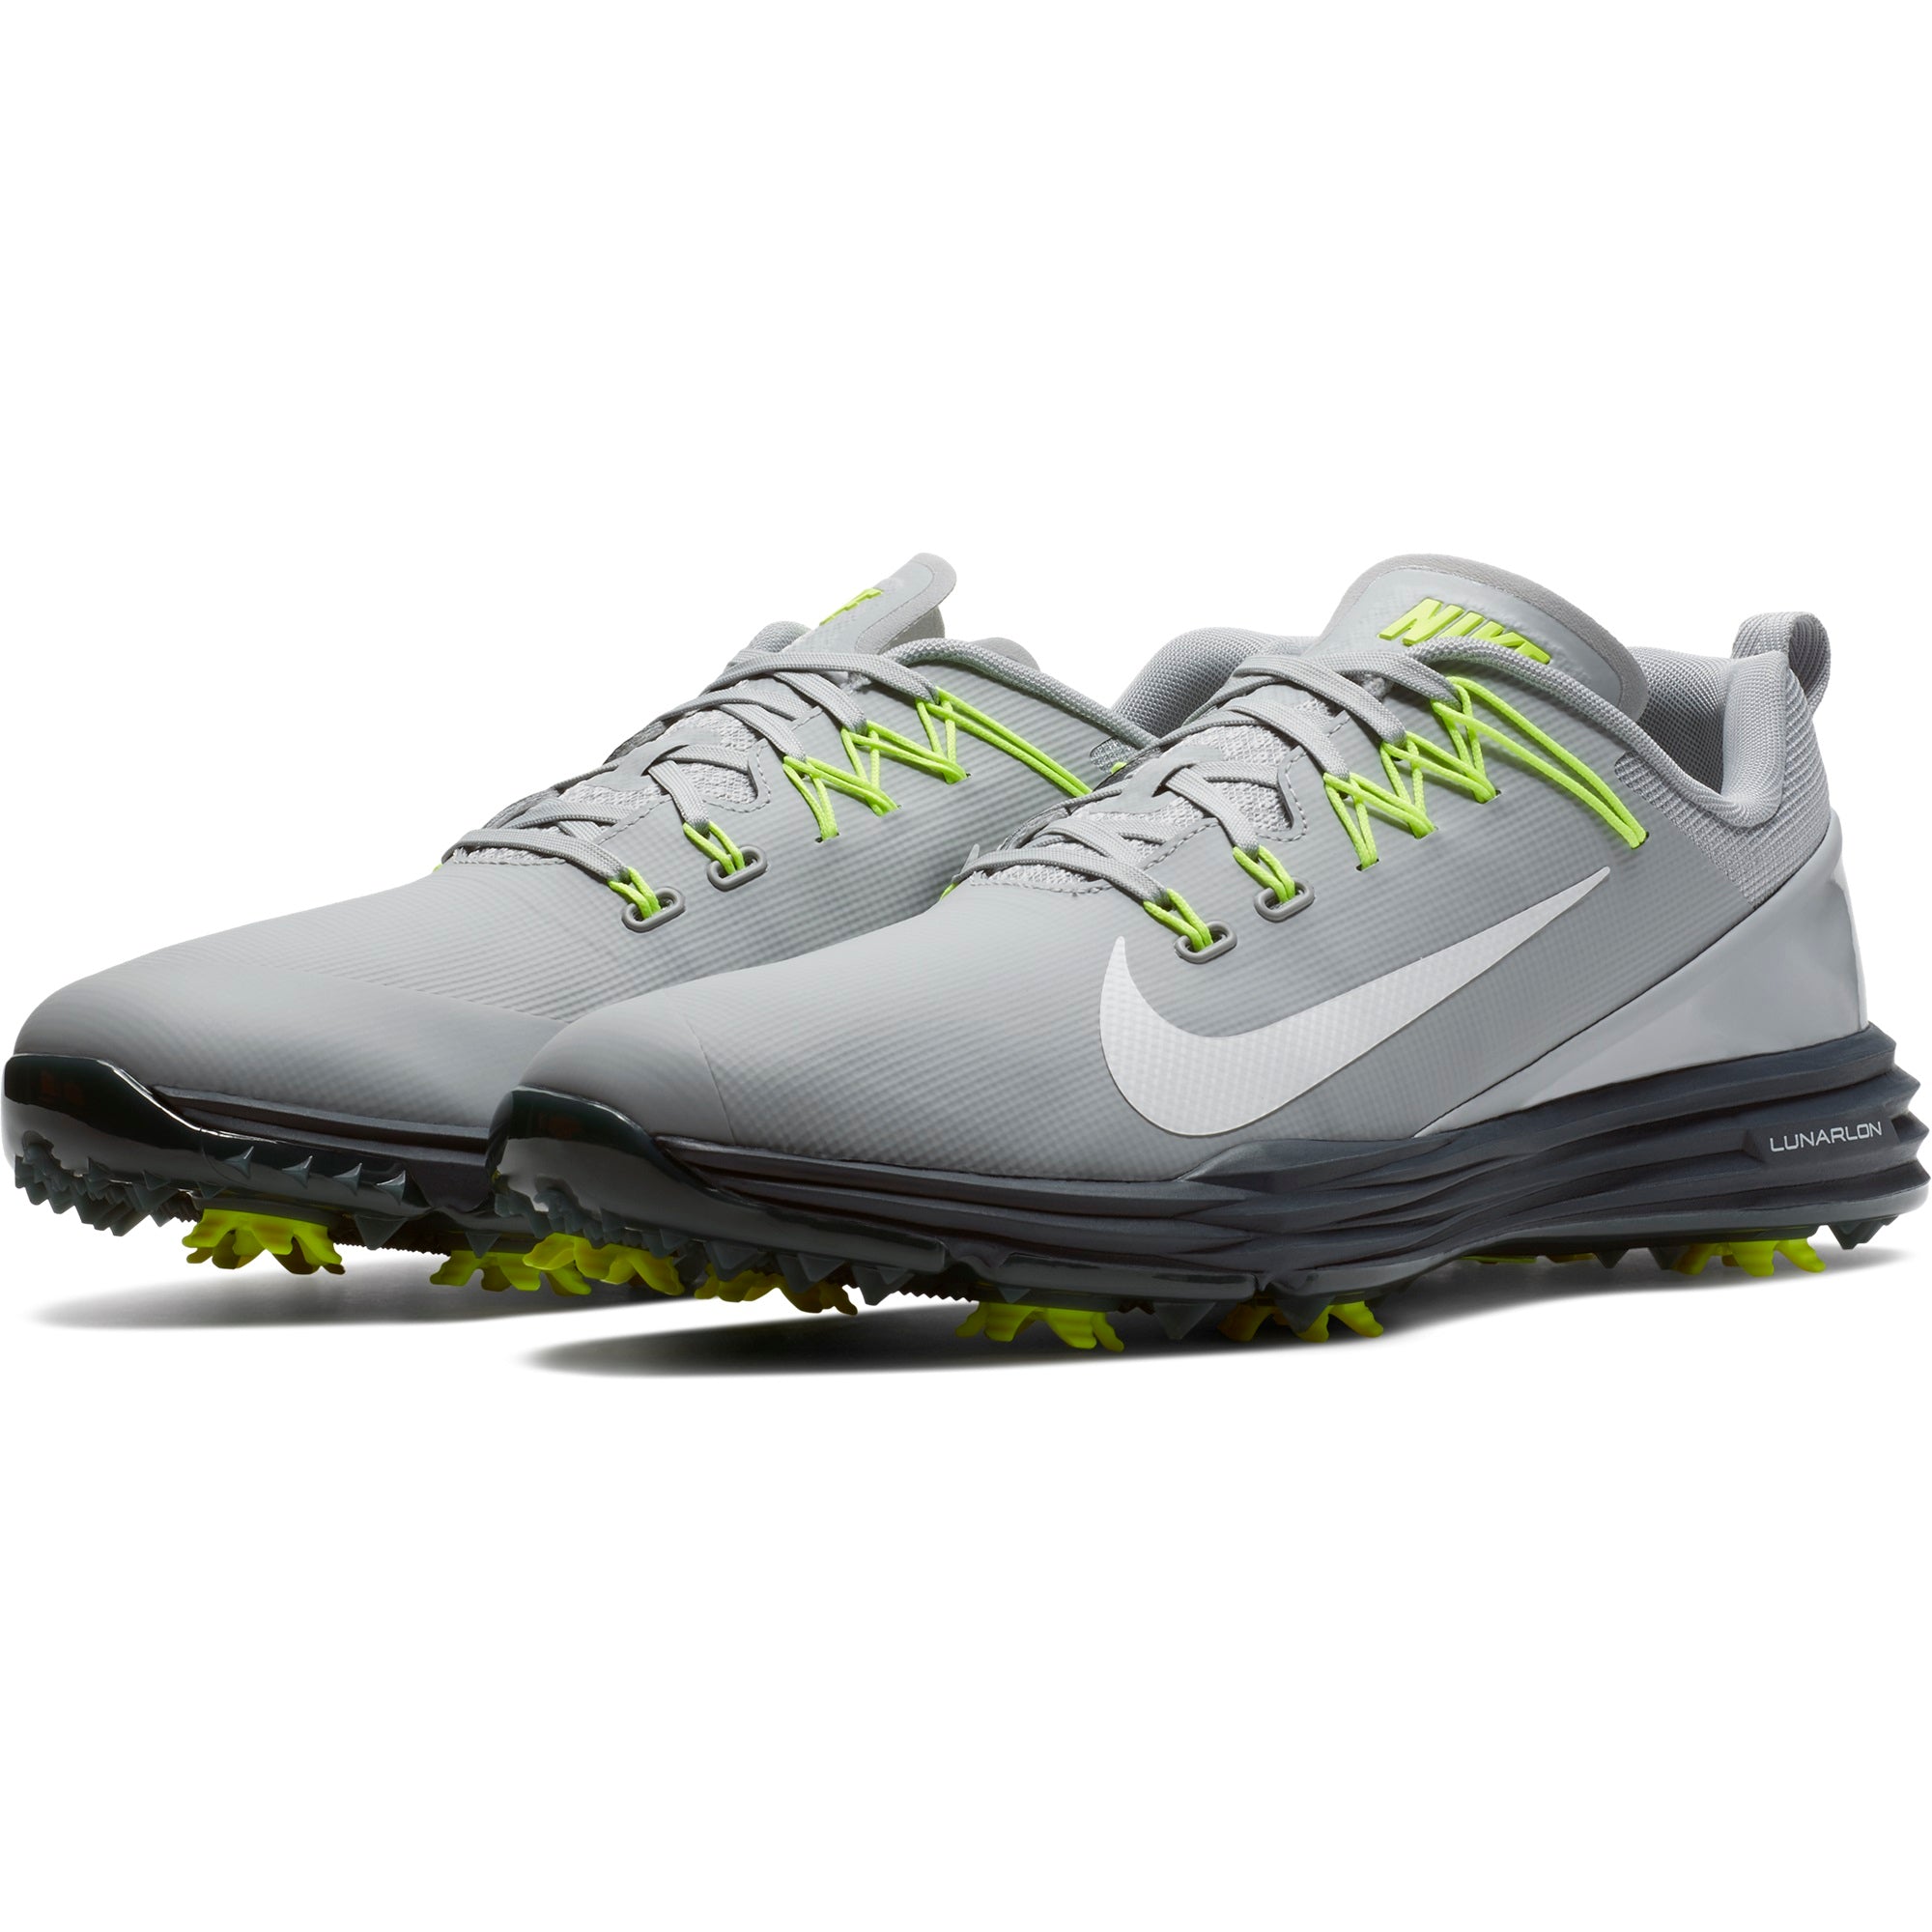 nike lunar command 2 golf shoes review